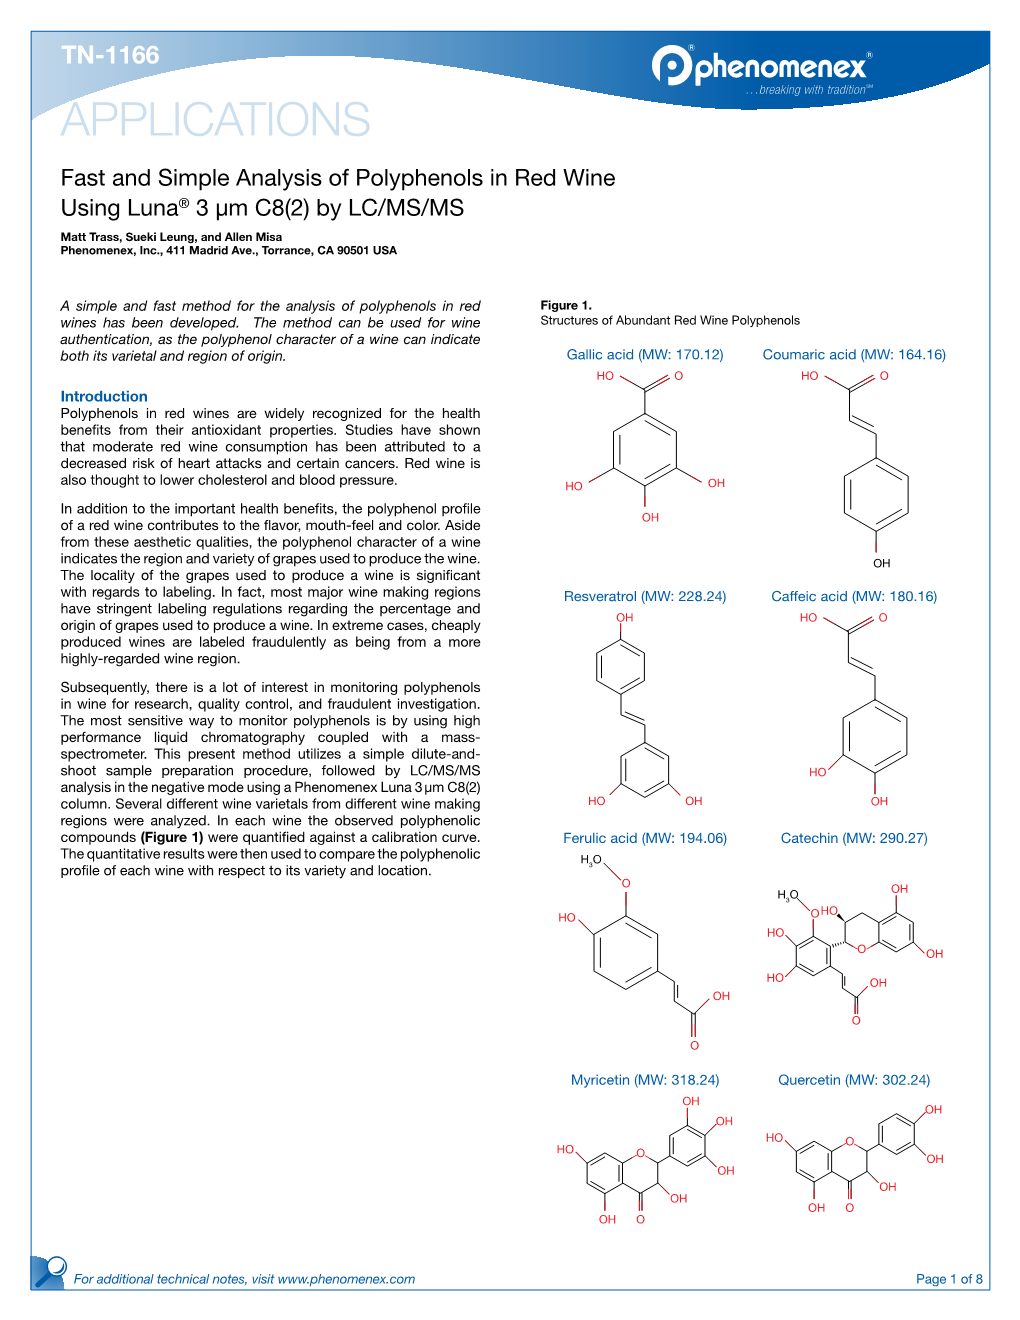 Fast and Simple Analysis of Polyphenols In